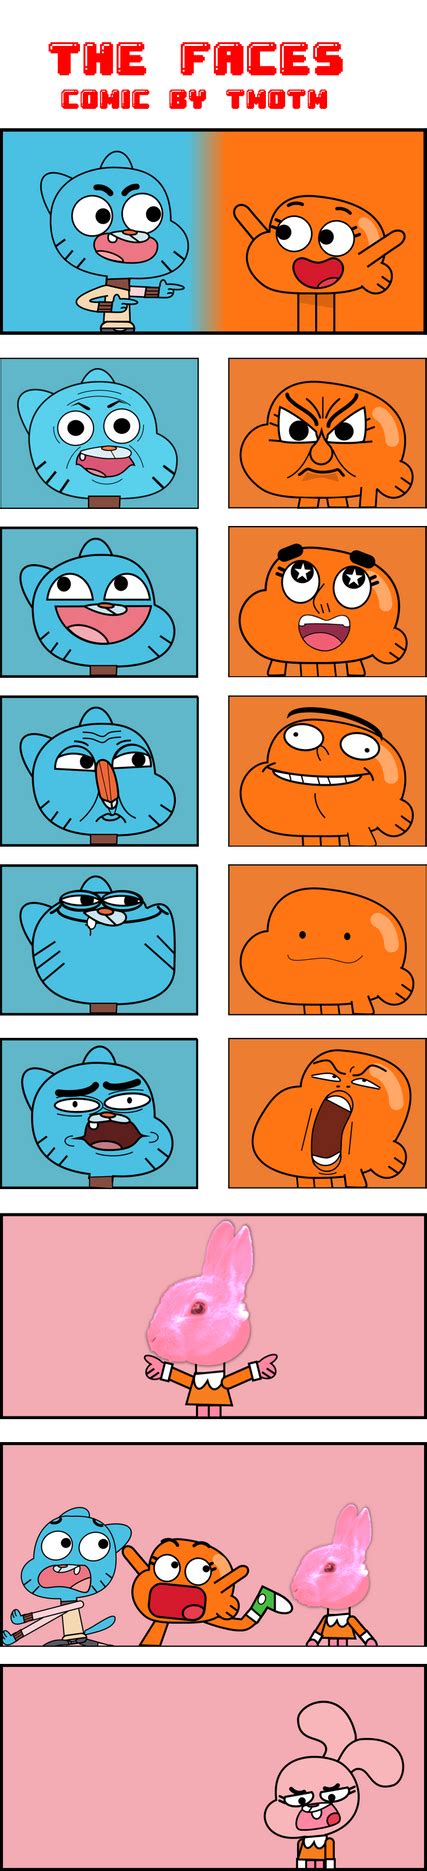 Tawog Comic The Faces By Themaxofthemaximum On Deviantart